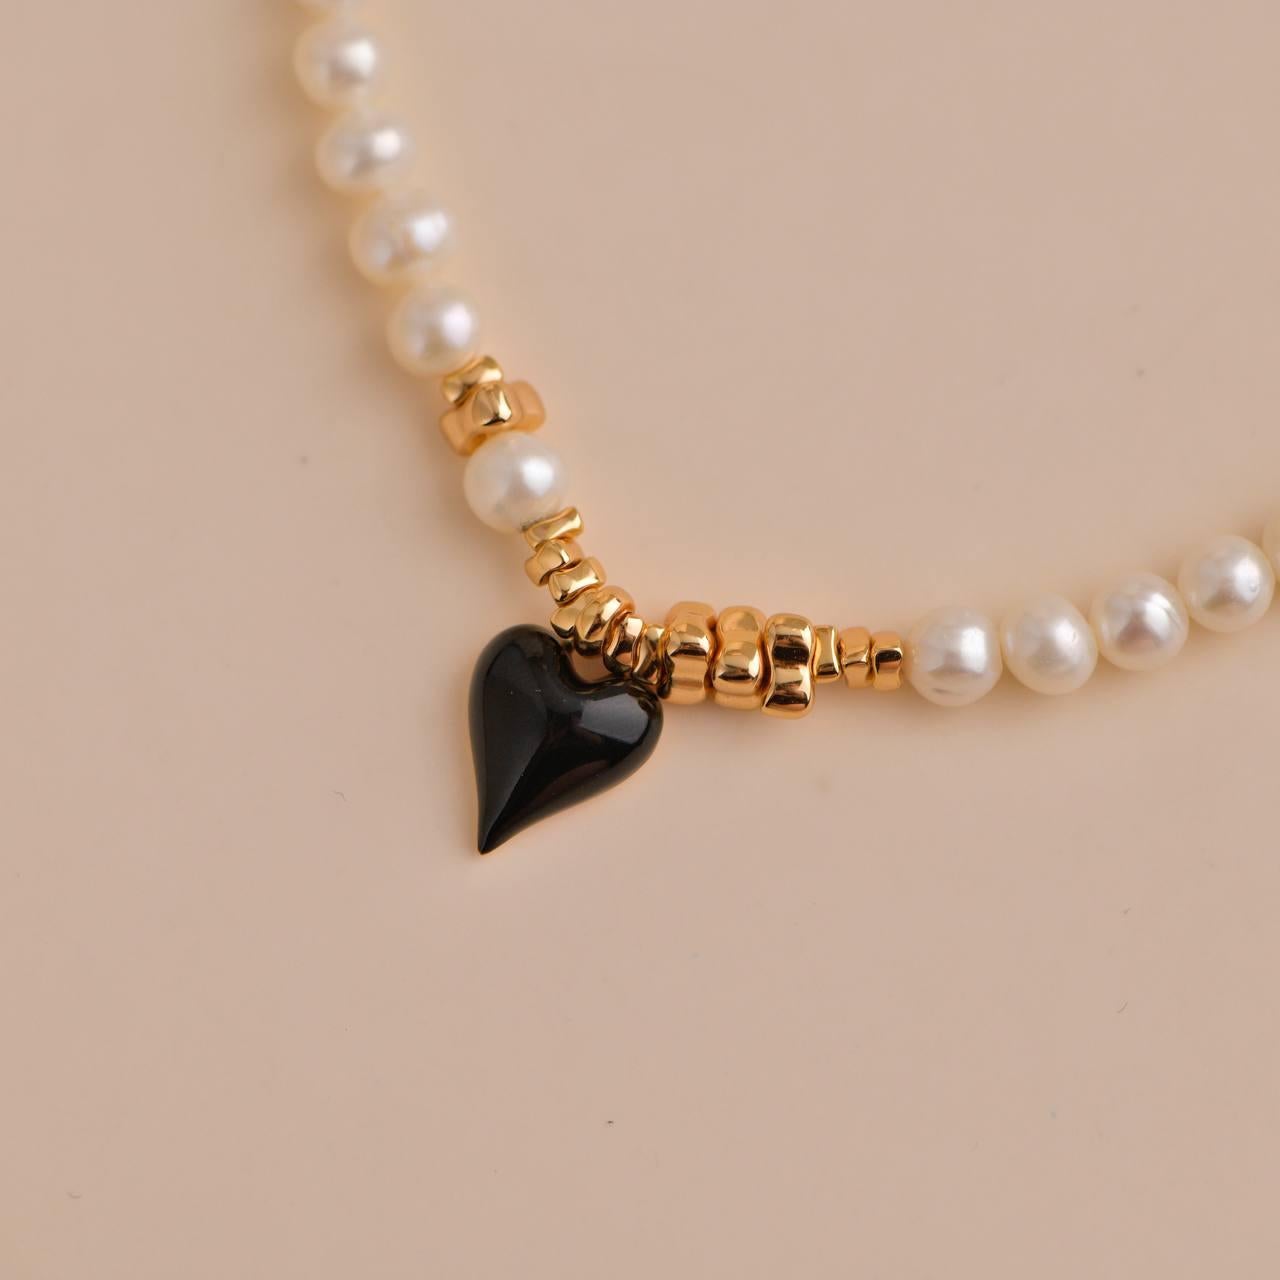 SKU: FT-0011
Material: 18K Gold-Plated / Natural Freshwater Pearls
Length: Approx. 38cm + 6cm Extension Chain
Pearl Size: Each pearl is Approx 5mm